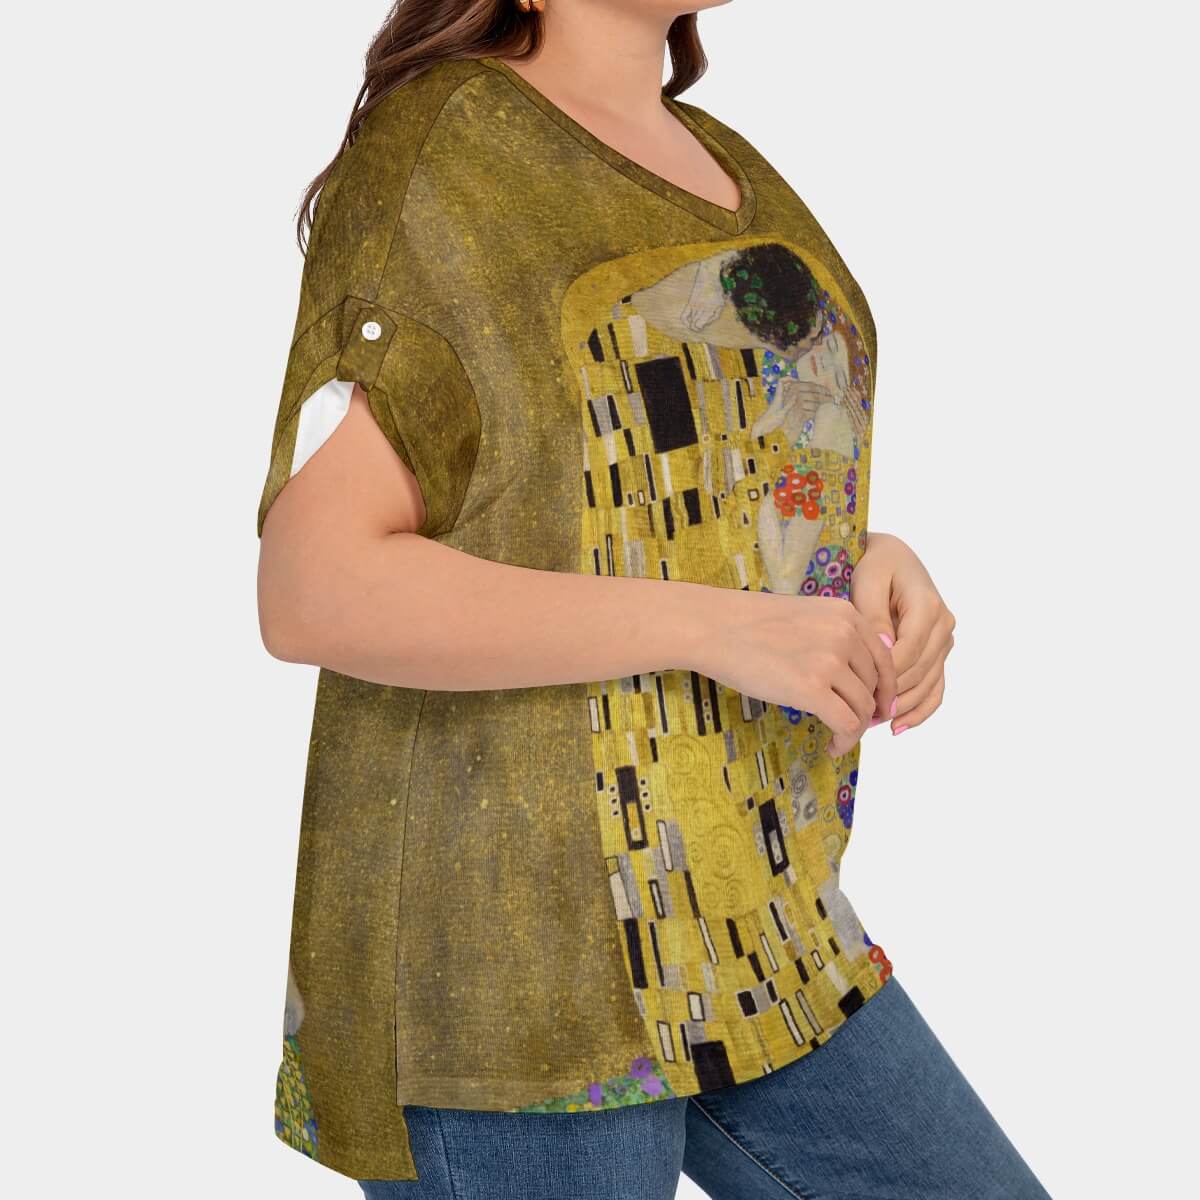 Plus Size Casual Fashion with Art Print